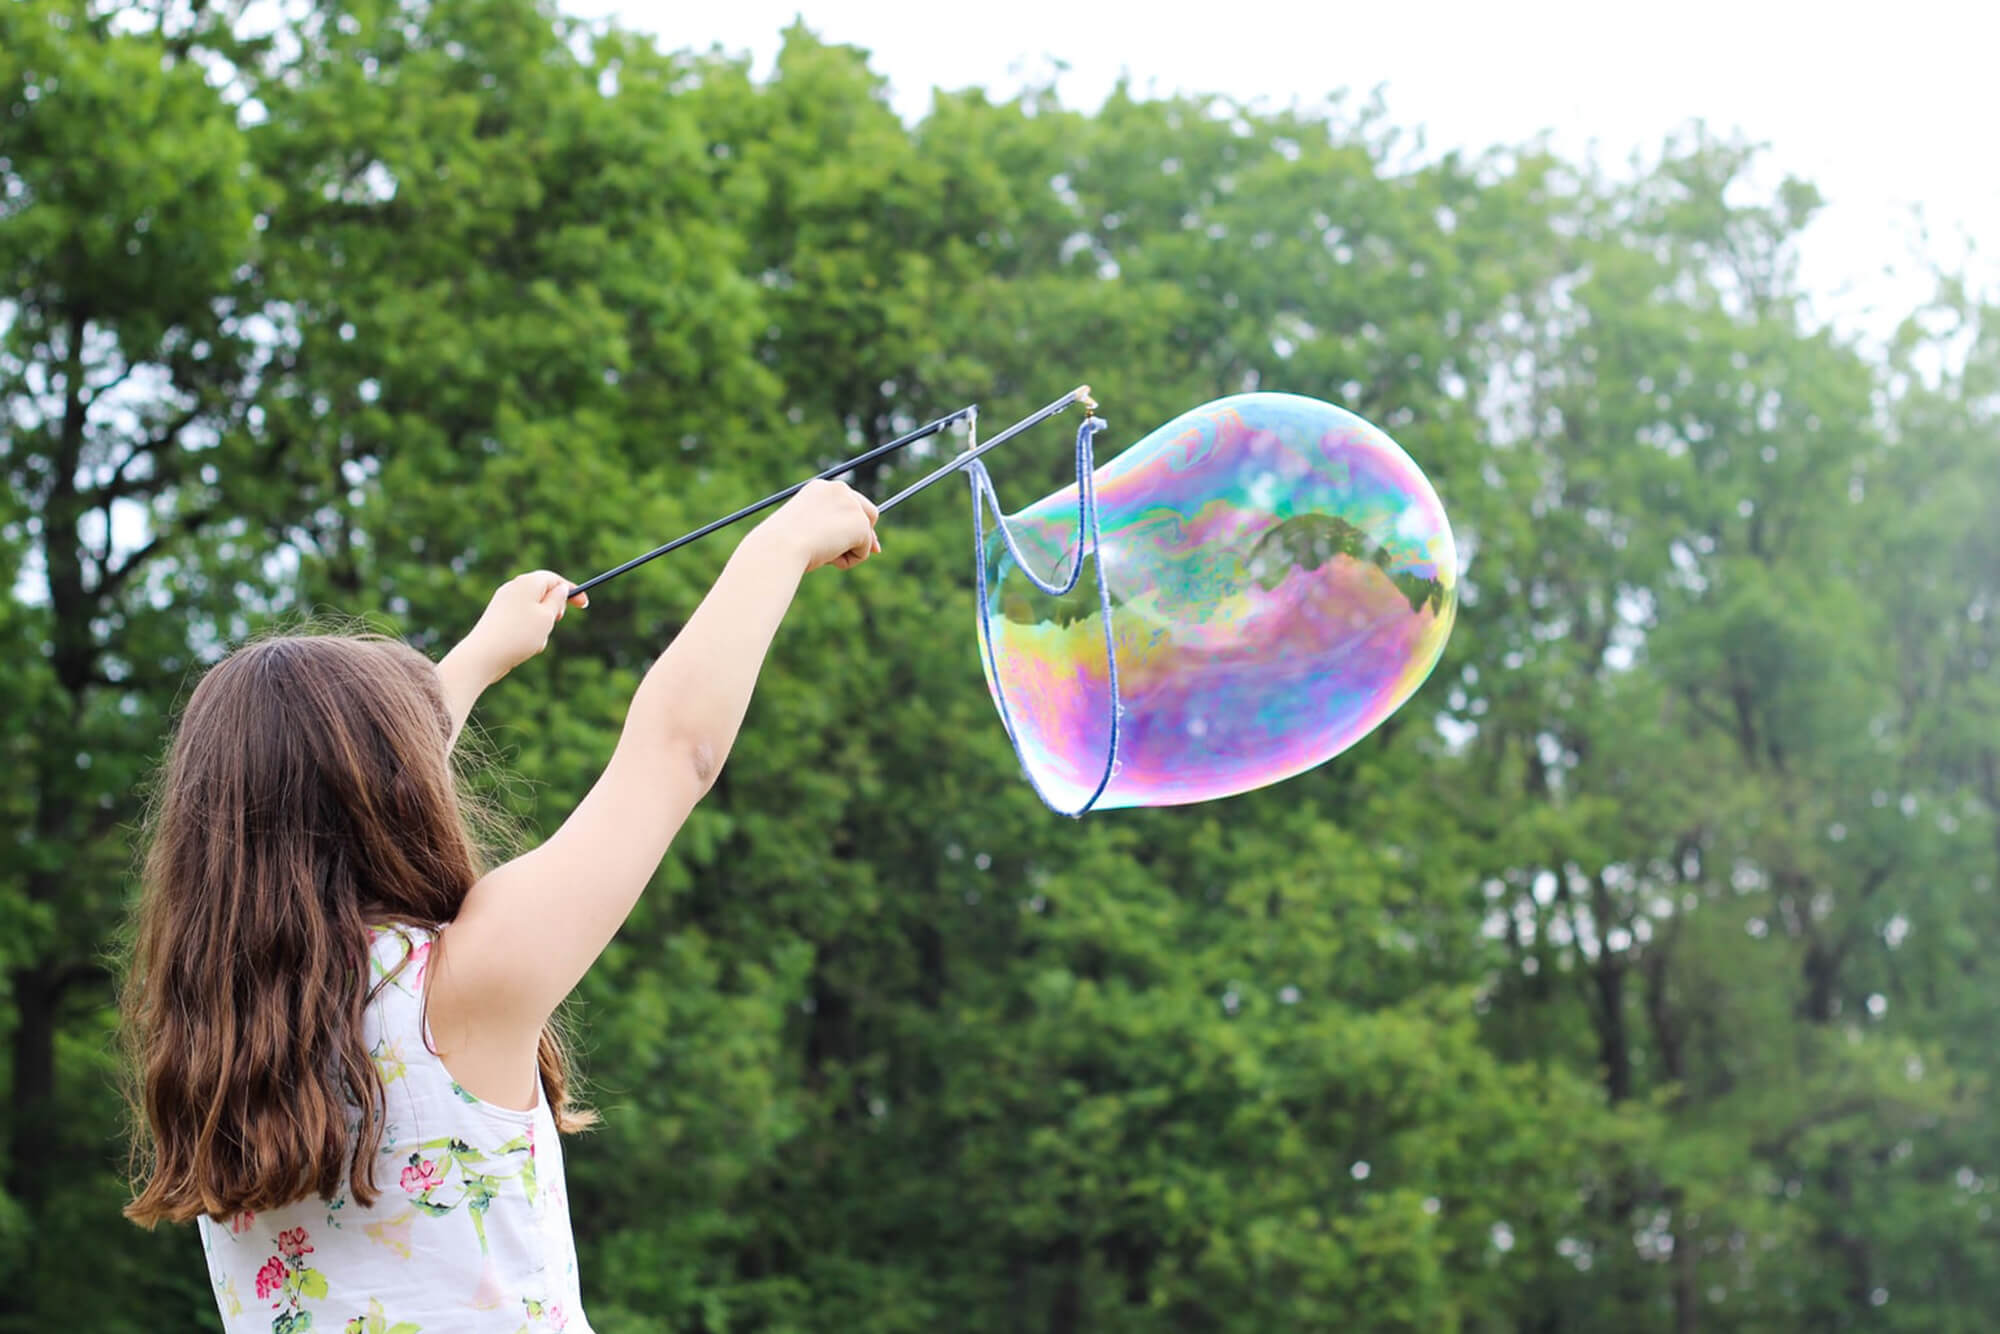 Try these kid-friendly DIYs for easy summer fun